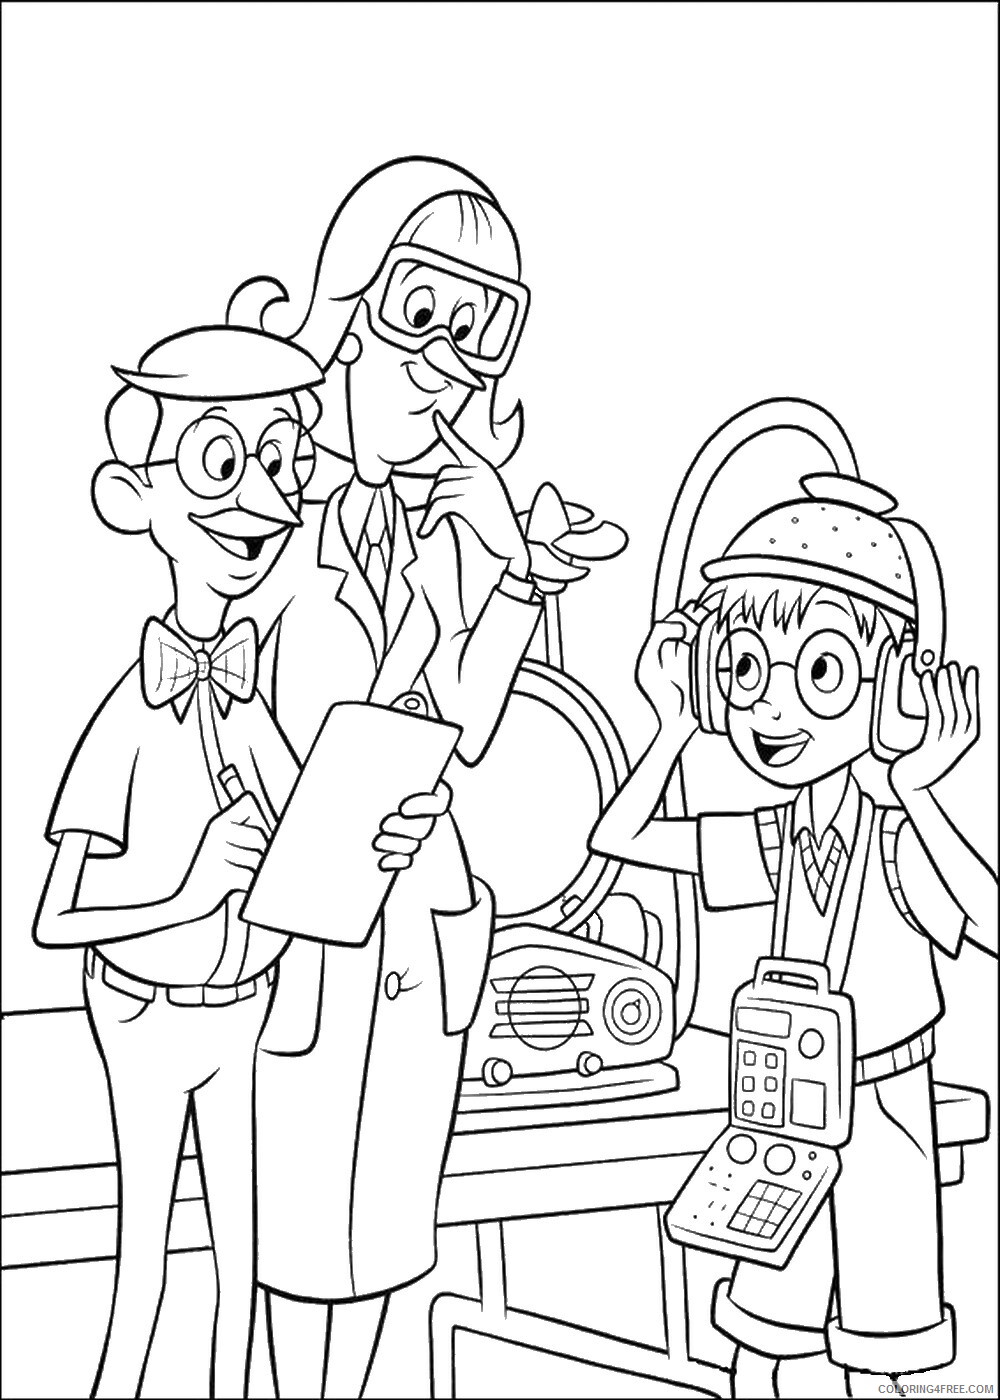 Meet the Robinsons Coloring Pages TV Film meet_the_robinsons Printable 2020 04997 Coloring4free